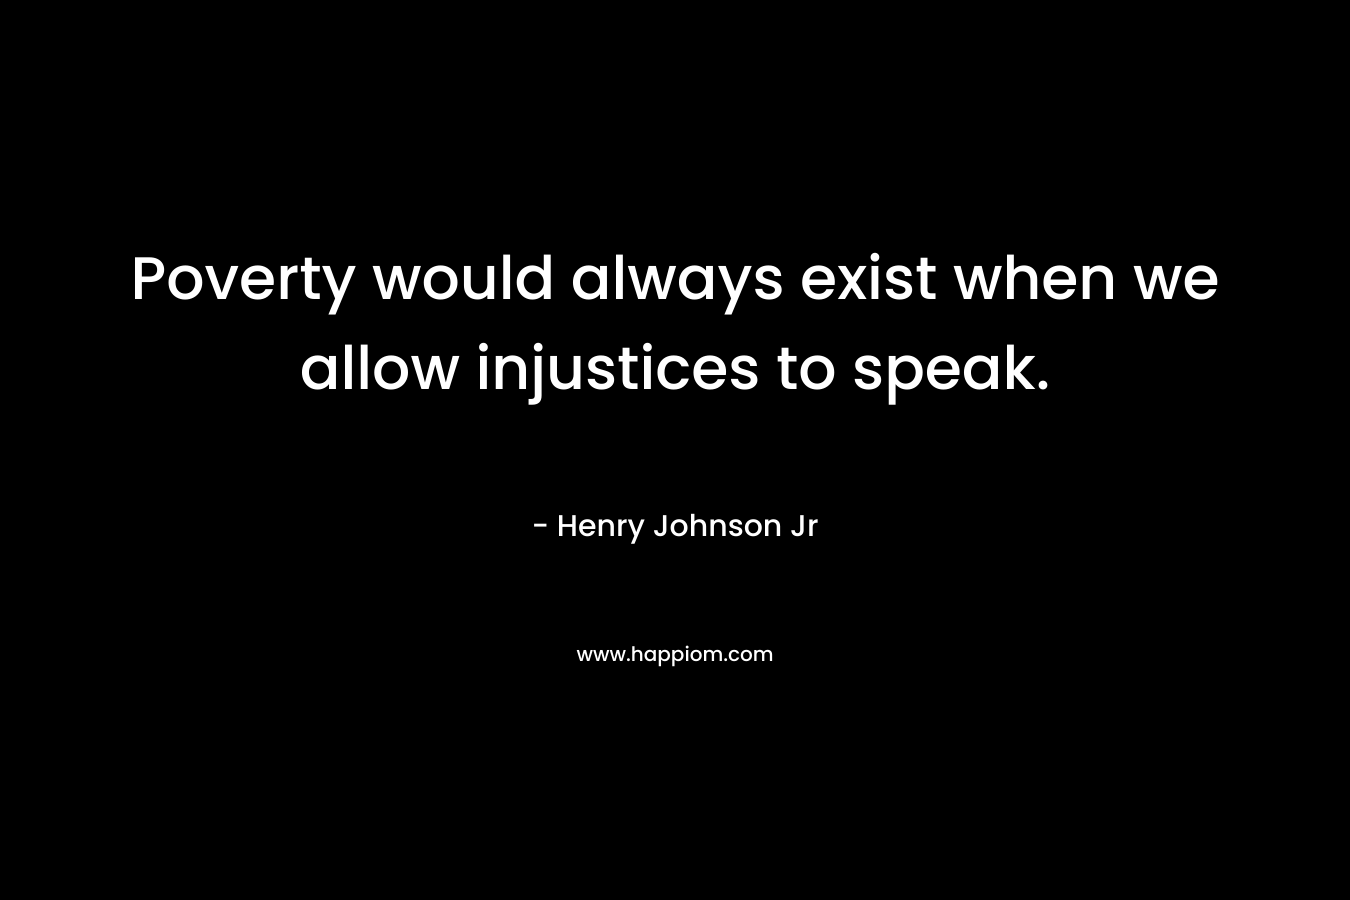 Poverty would always exist when we allow injustices to speak. – Henry Johnson Jr